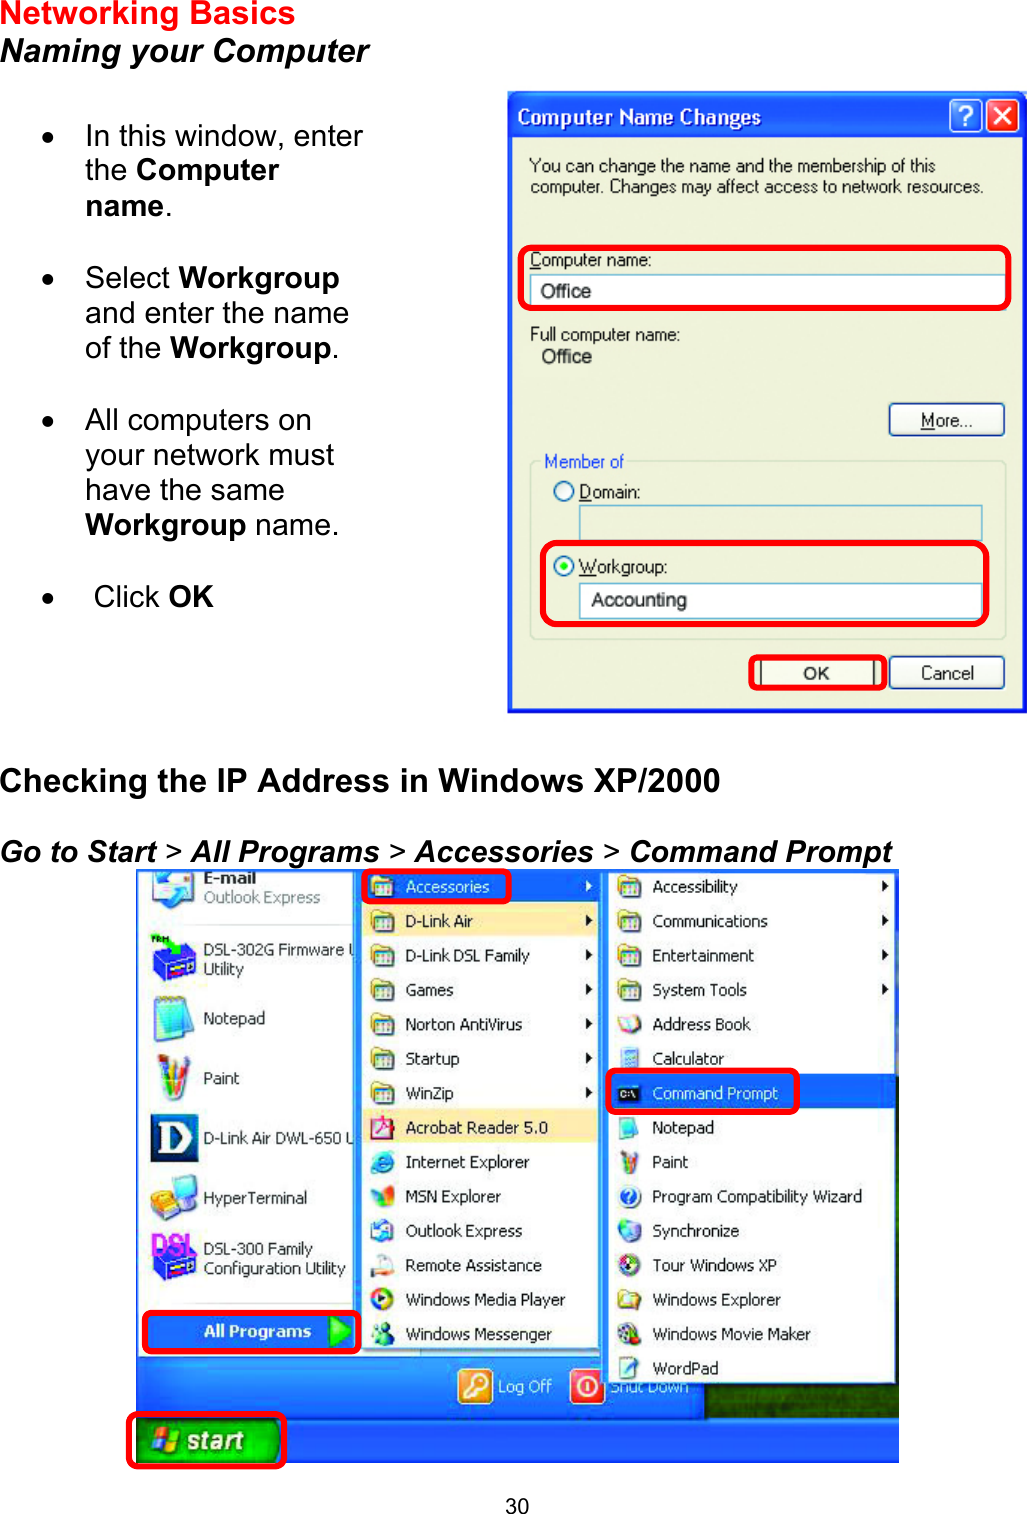  30Networking Basics  Naming your Computer      Checking the IP Address in Windows XP/2000  Go to Start &gt; All Programs &gt; Accessories &gt; Command Prompt  •  In this window, enter the Computer name.  •  Select Workgroup and enter the name of the Workgroup.  •  All computers on your network must have the same Workgroup name.   •   Click OK 